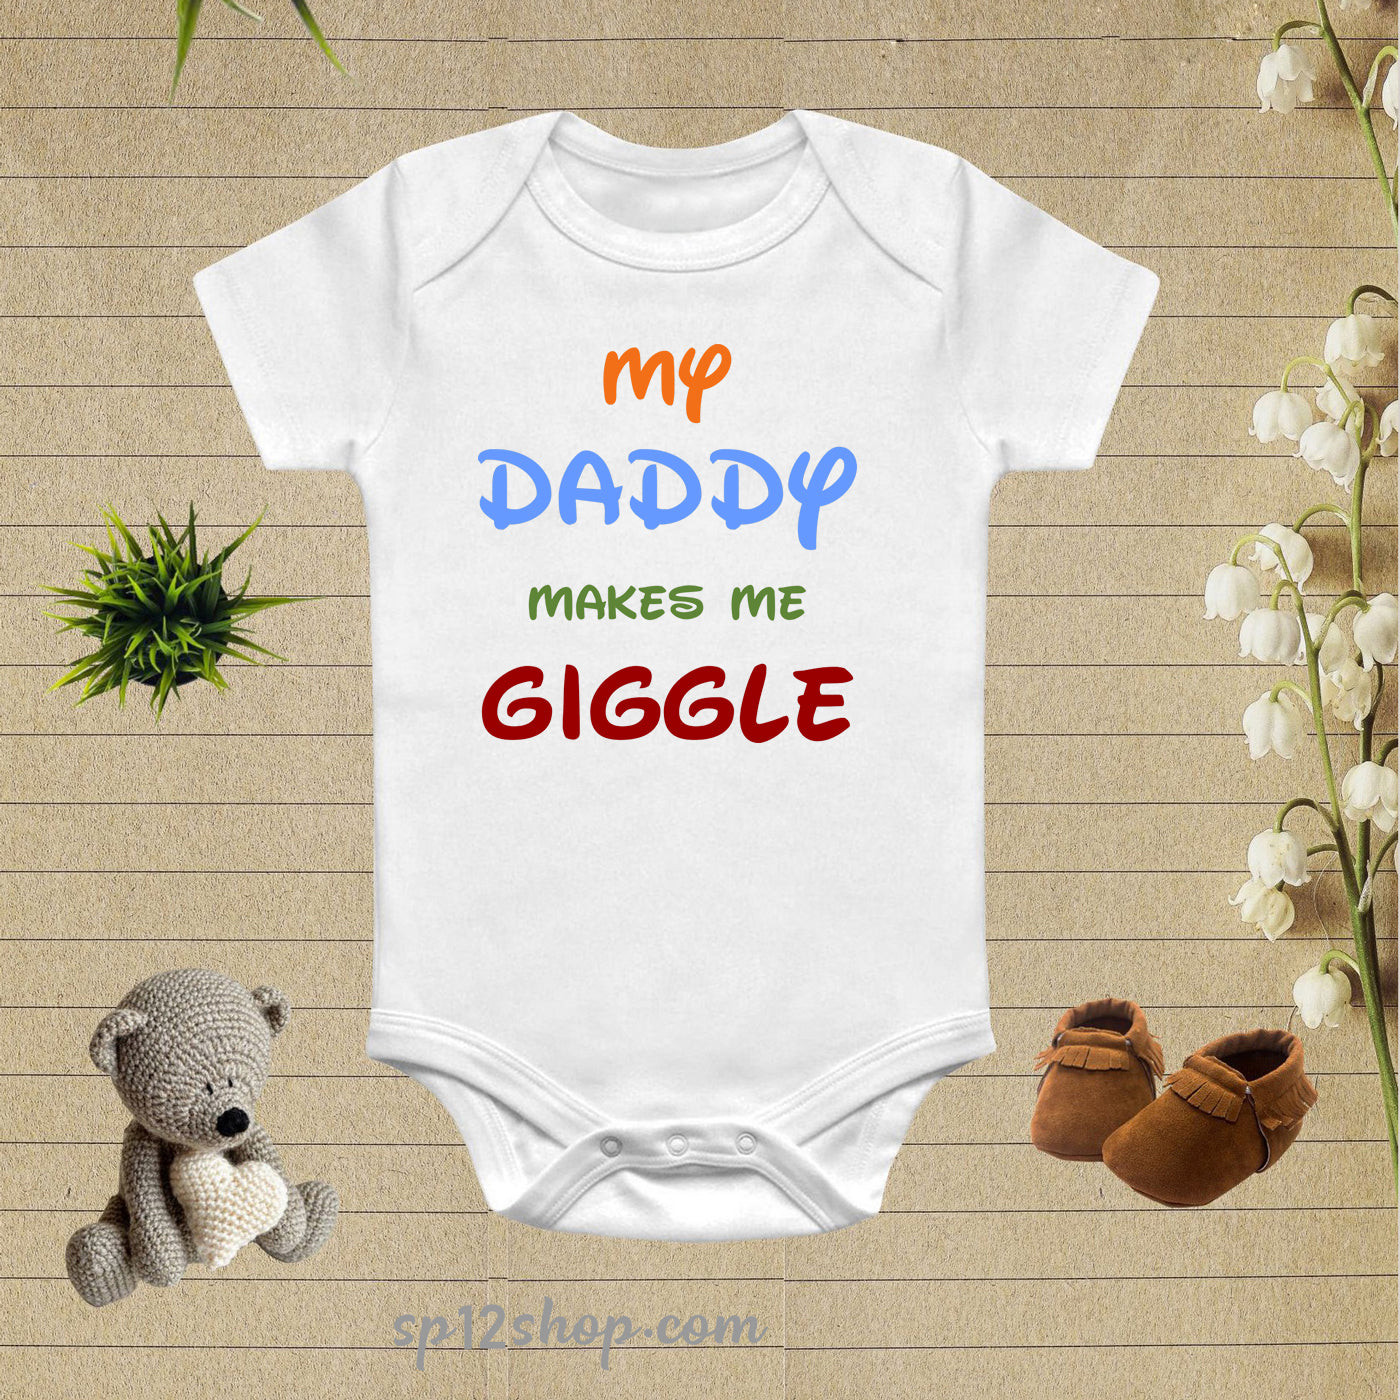 MP Daddy Makes Me Giggle Baby Bodysuit Onesie